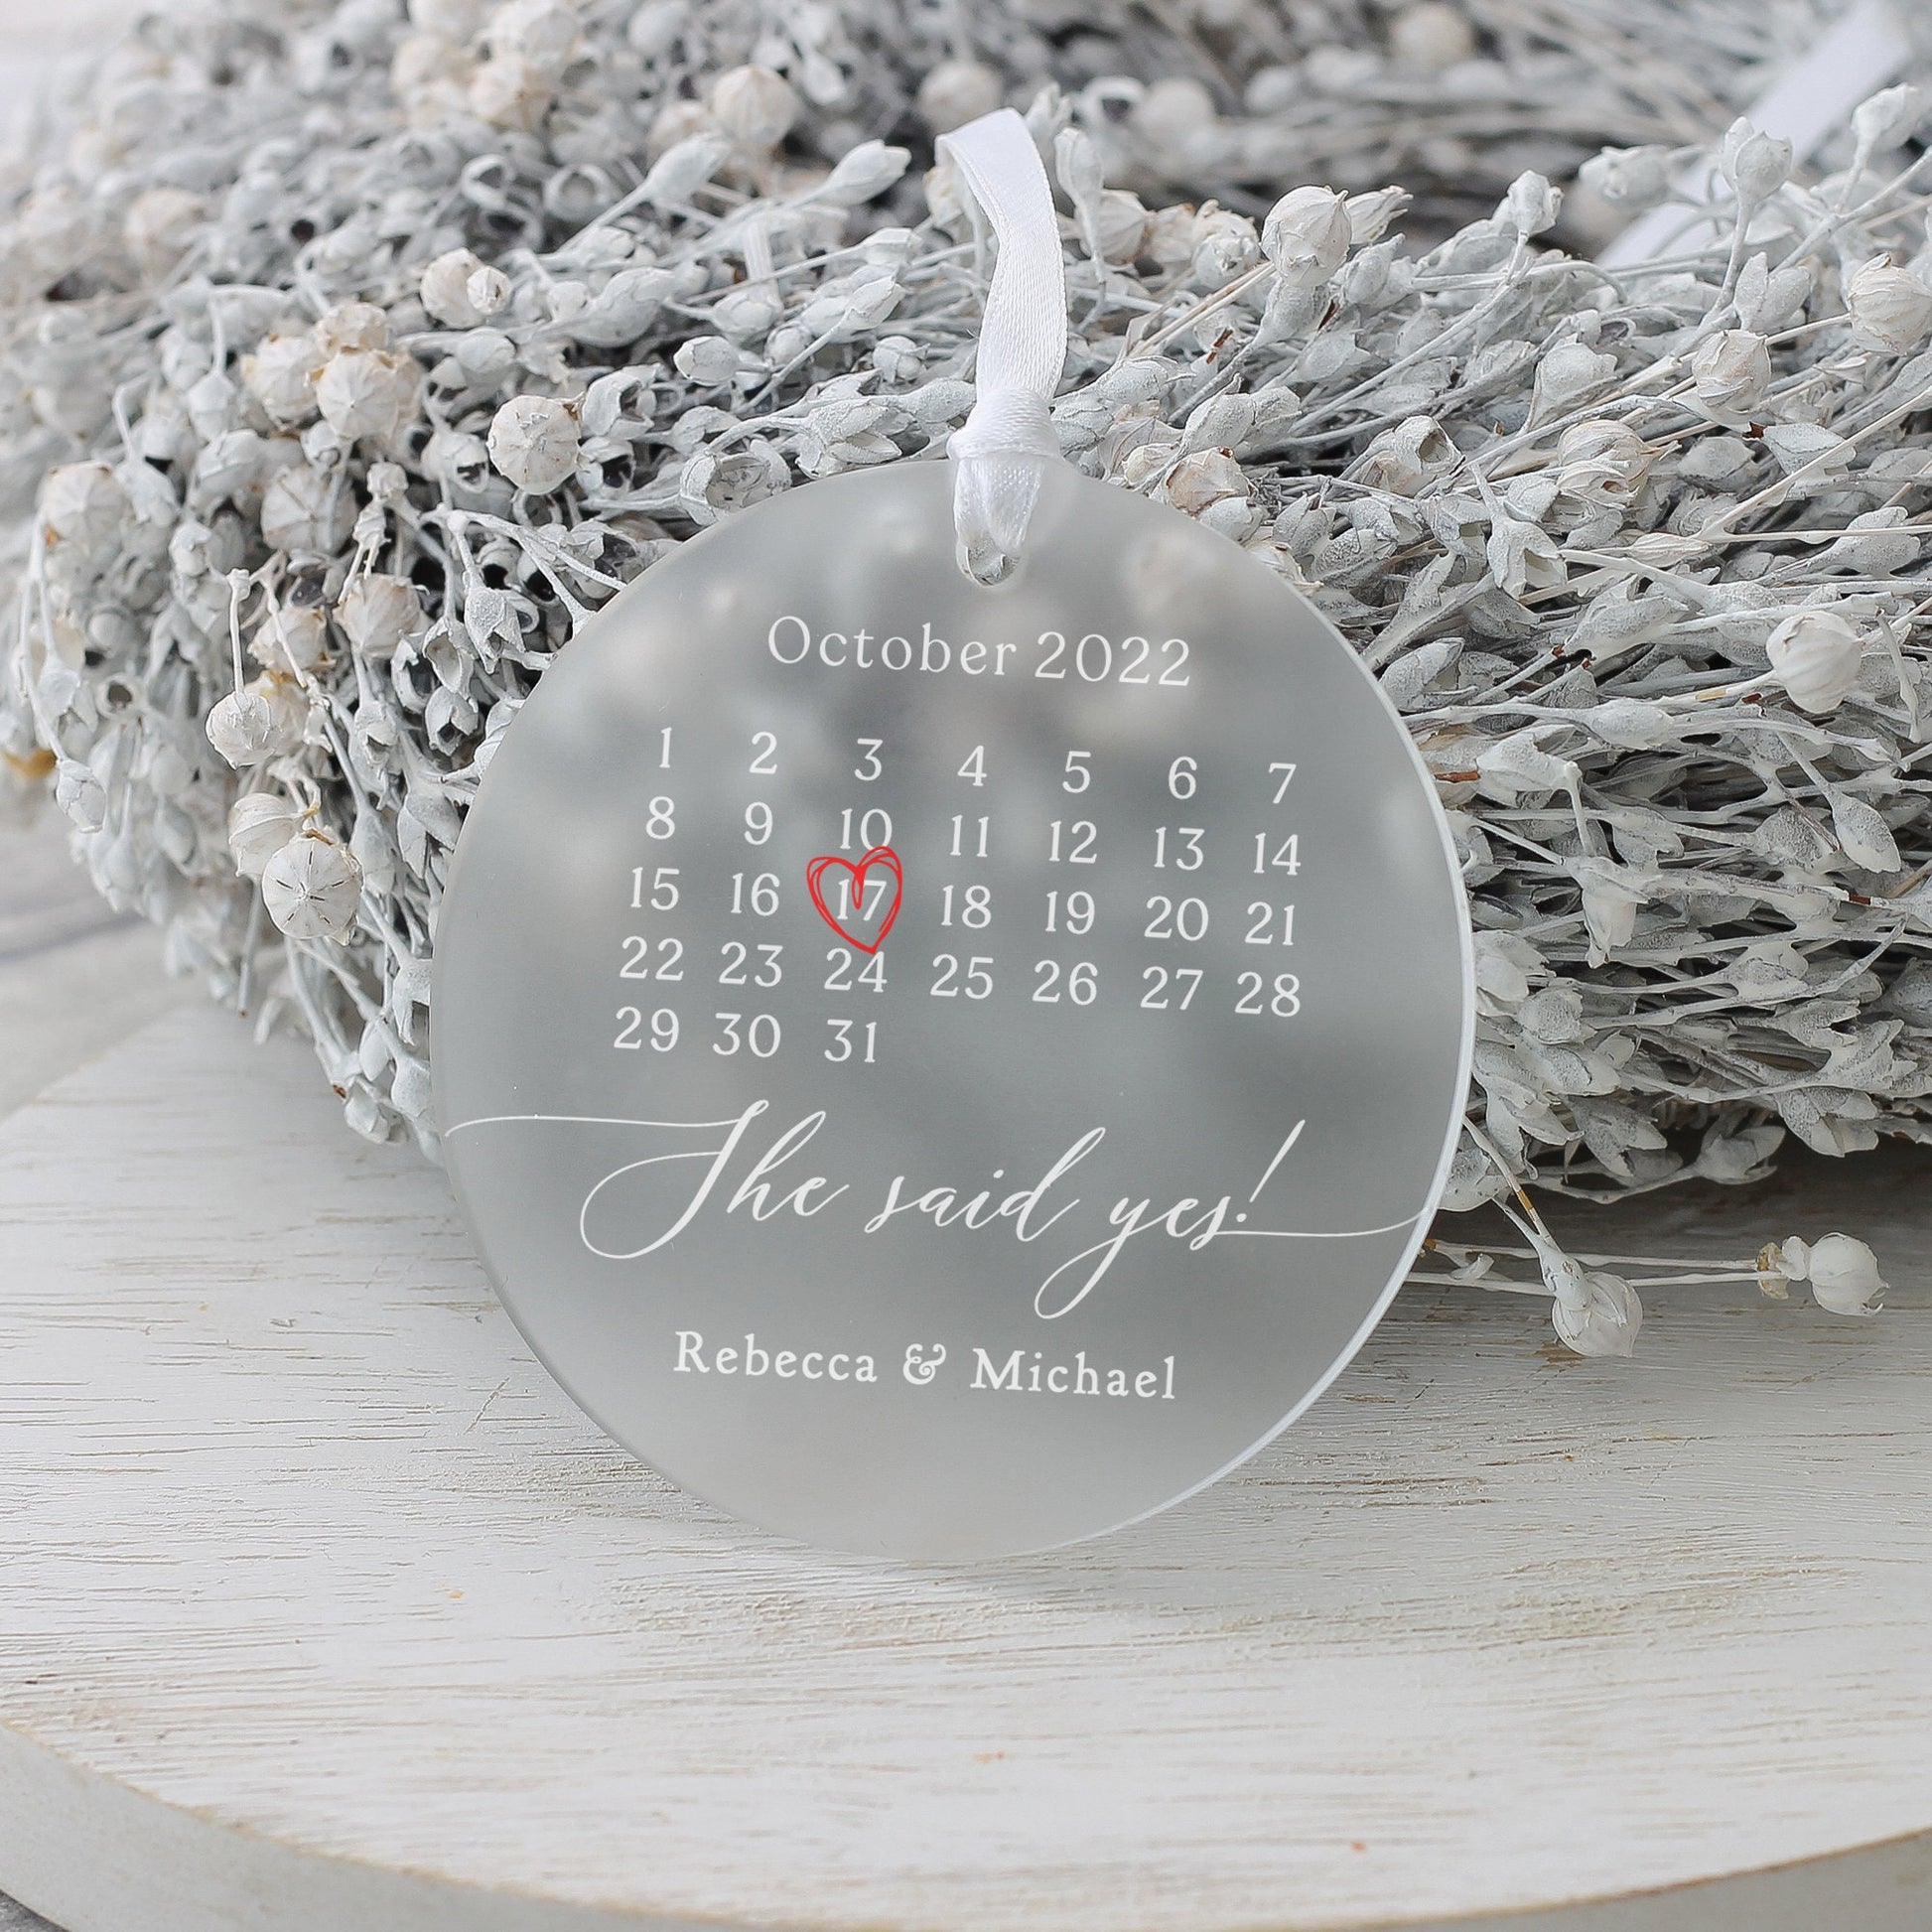 Personalised Engagement Gift, Engaged Gift, Engagement Keepsake Gift, Special Date Calendar Gift, Frosted Acrylic, Special Date Keepsake